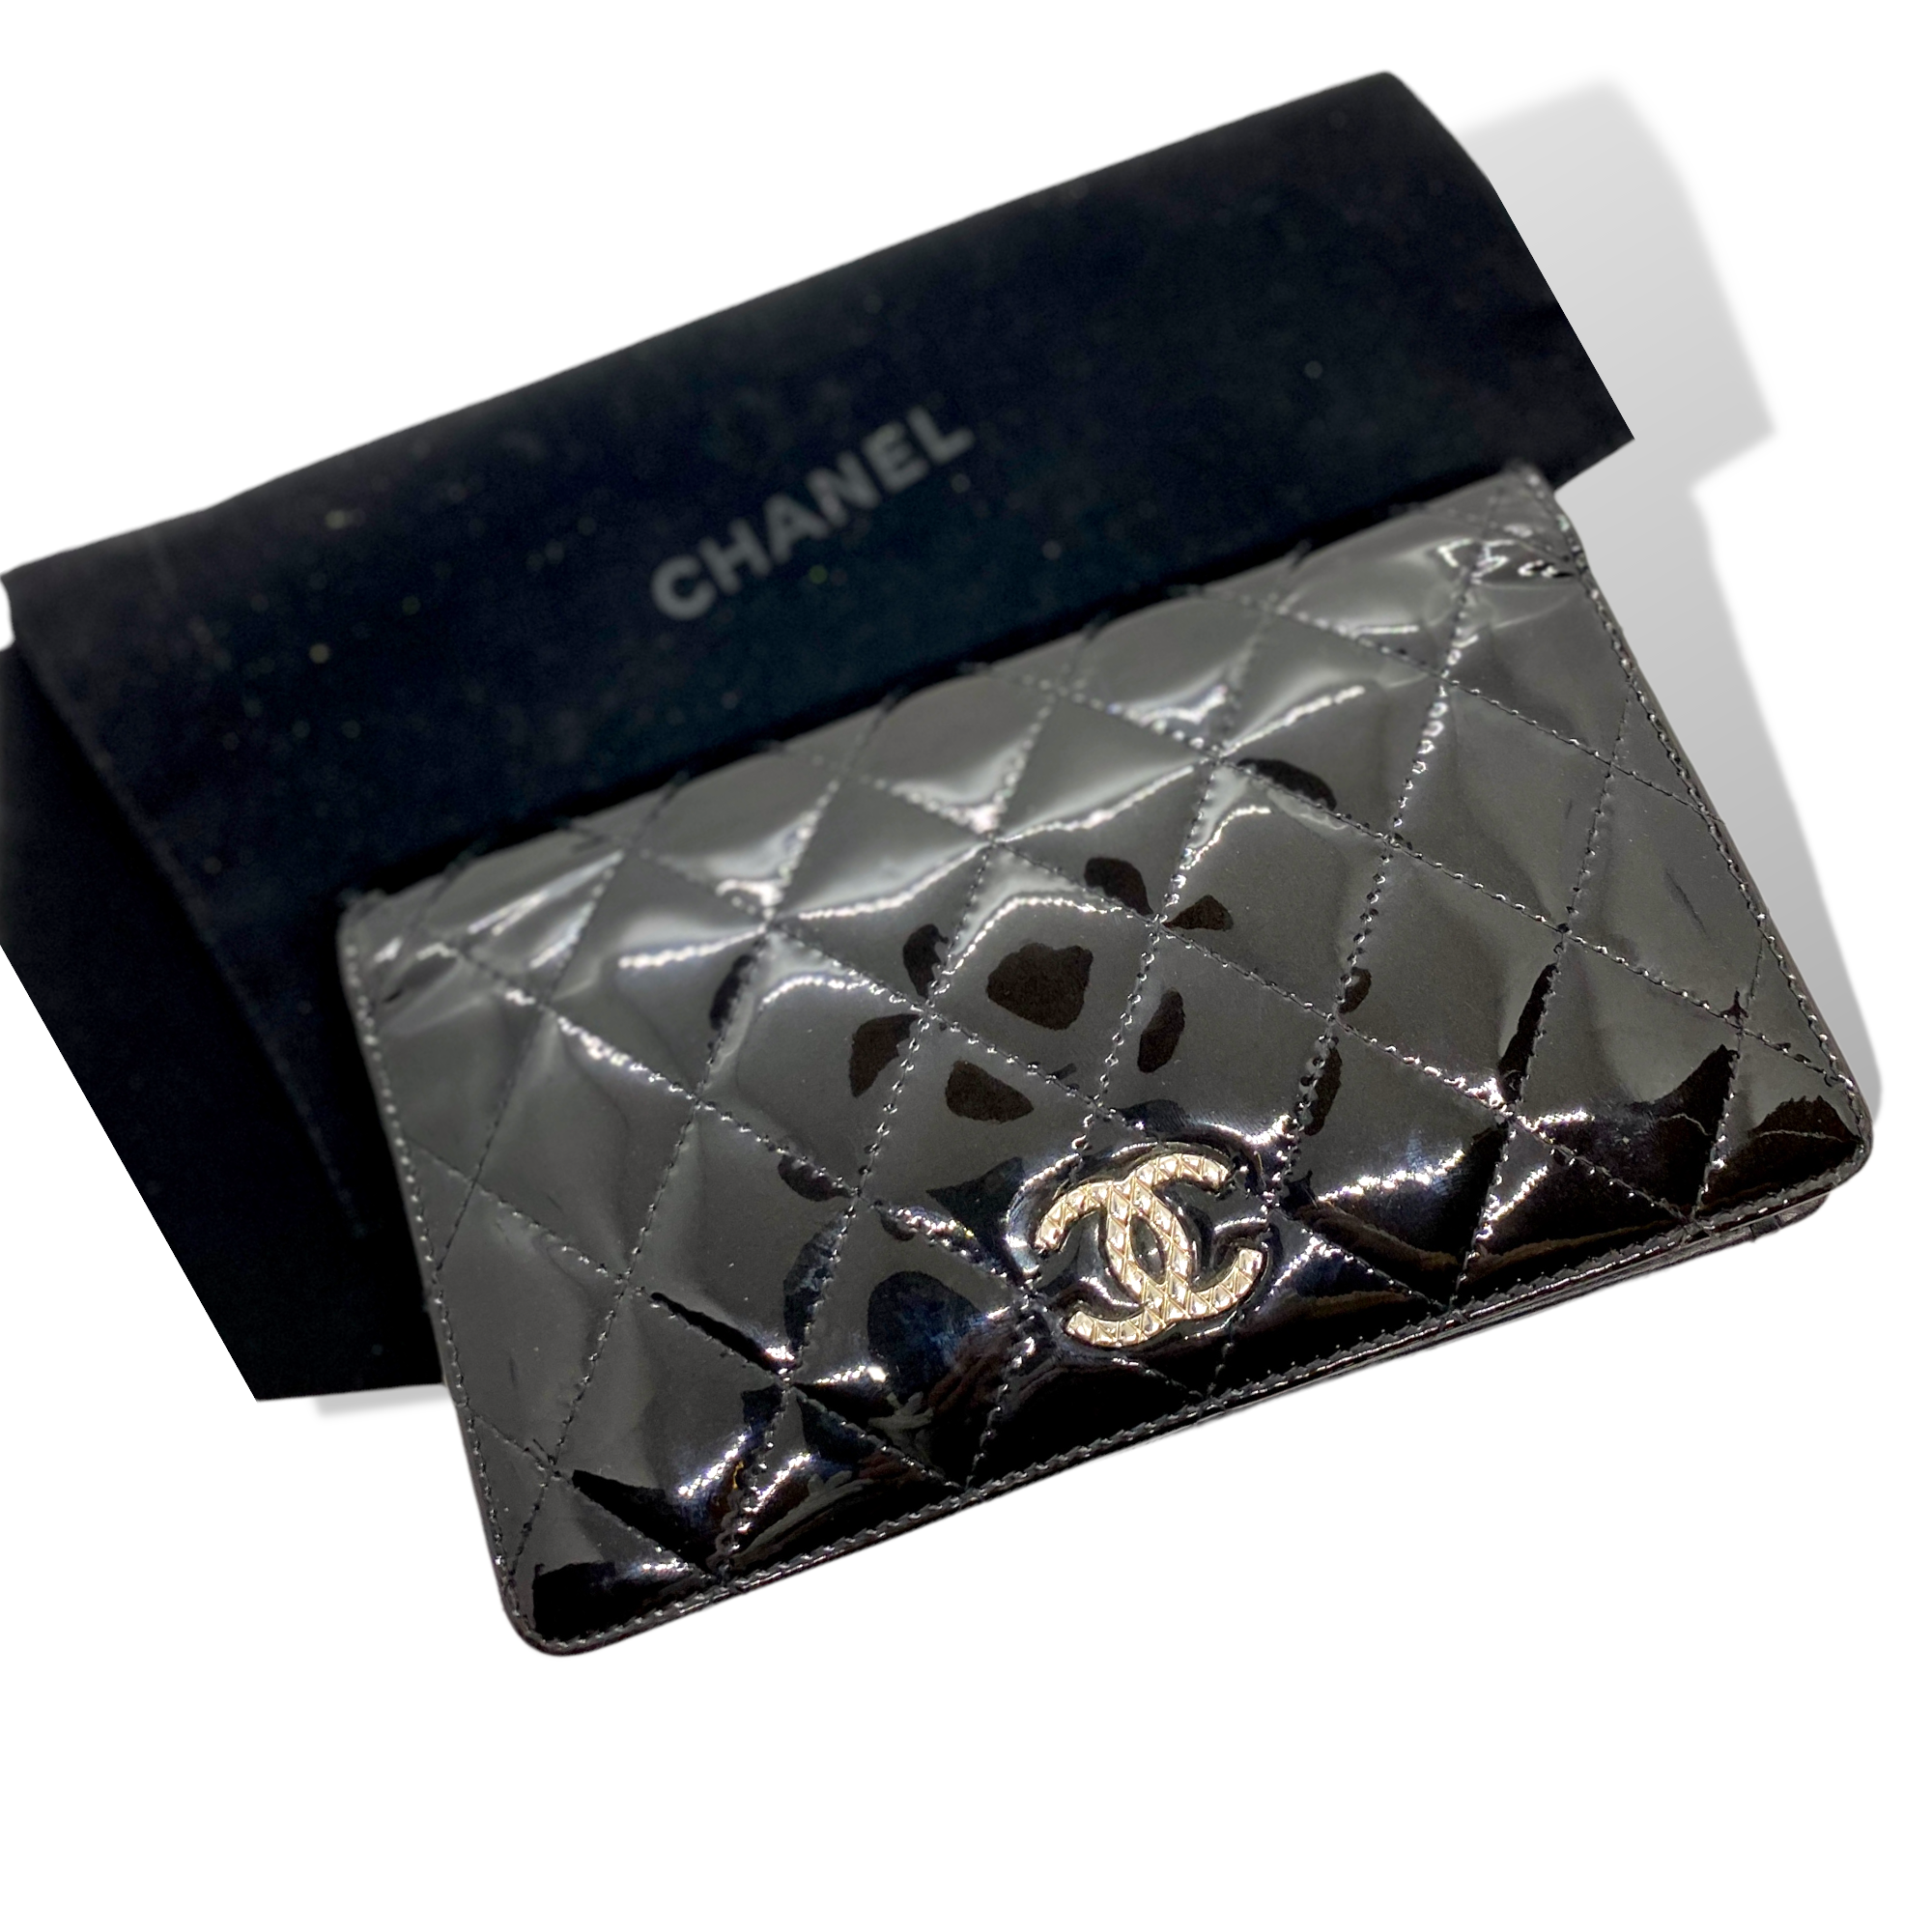 CHANEL Quilted Leather CC Logo Bifold Wallet Black